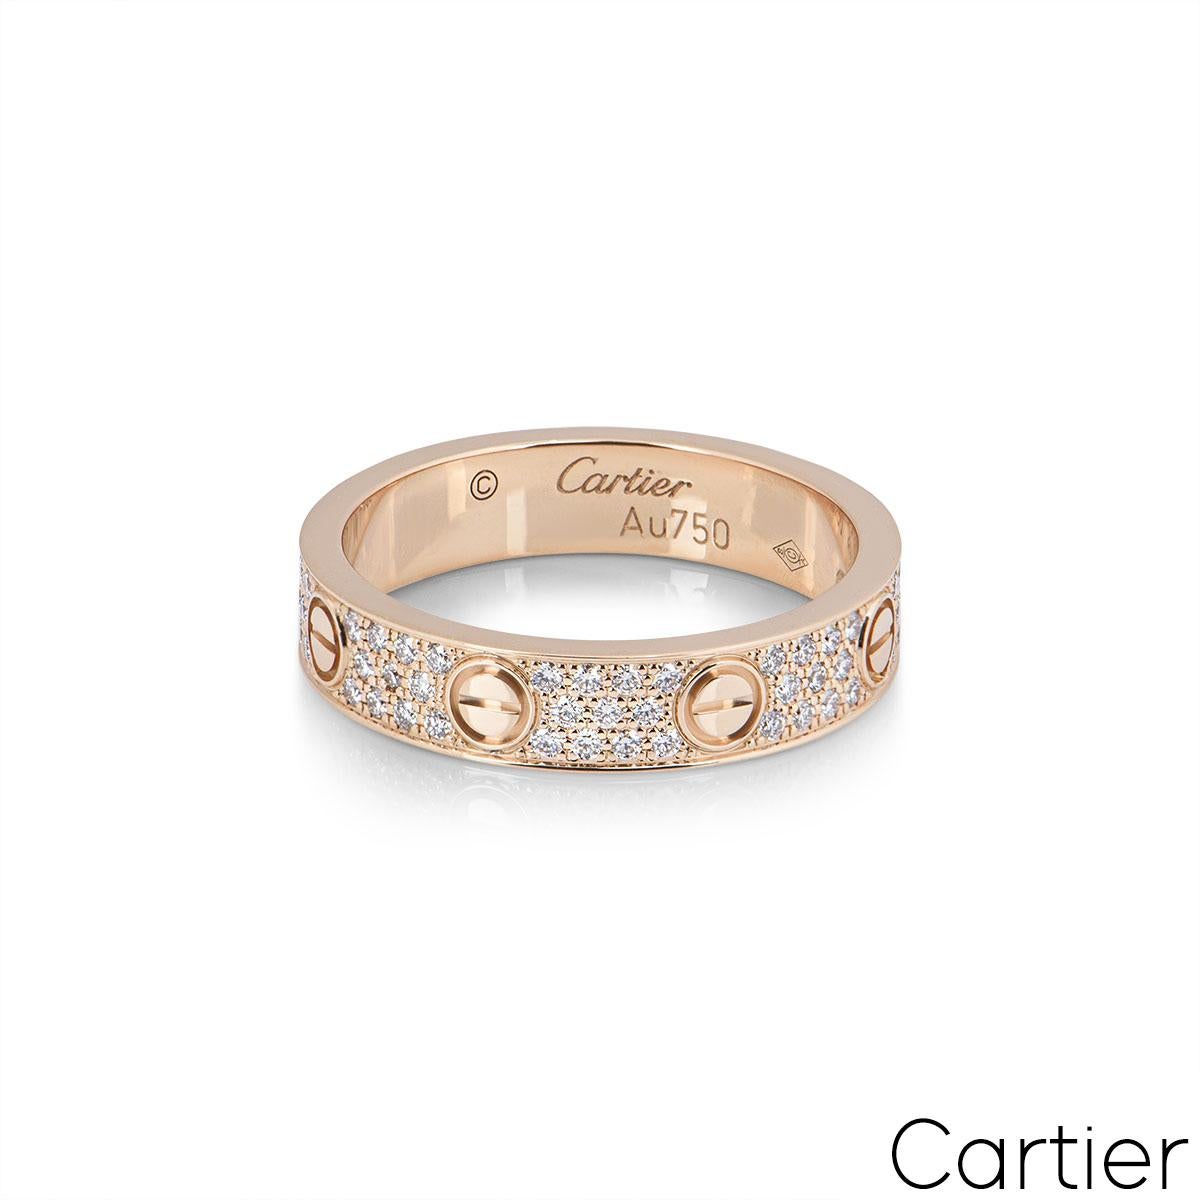 cartier ring